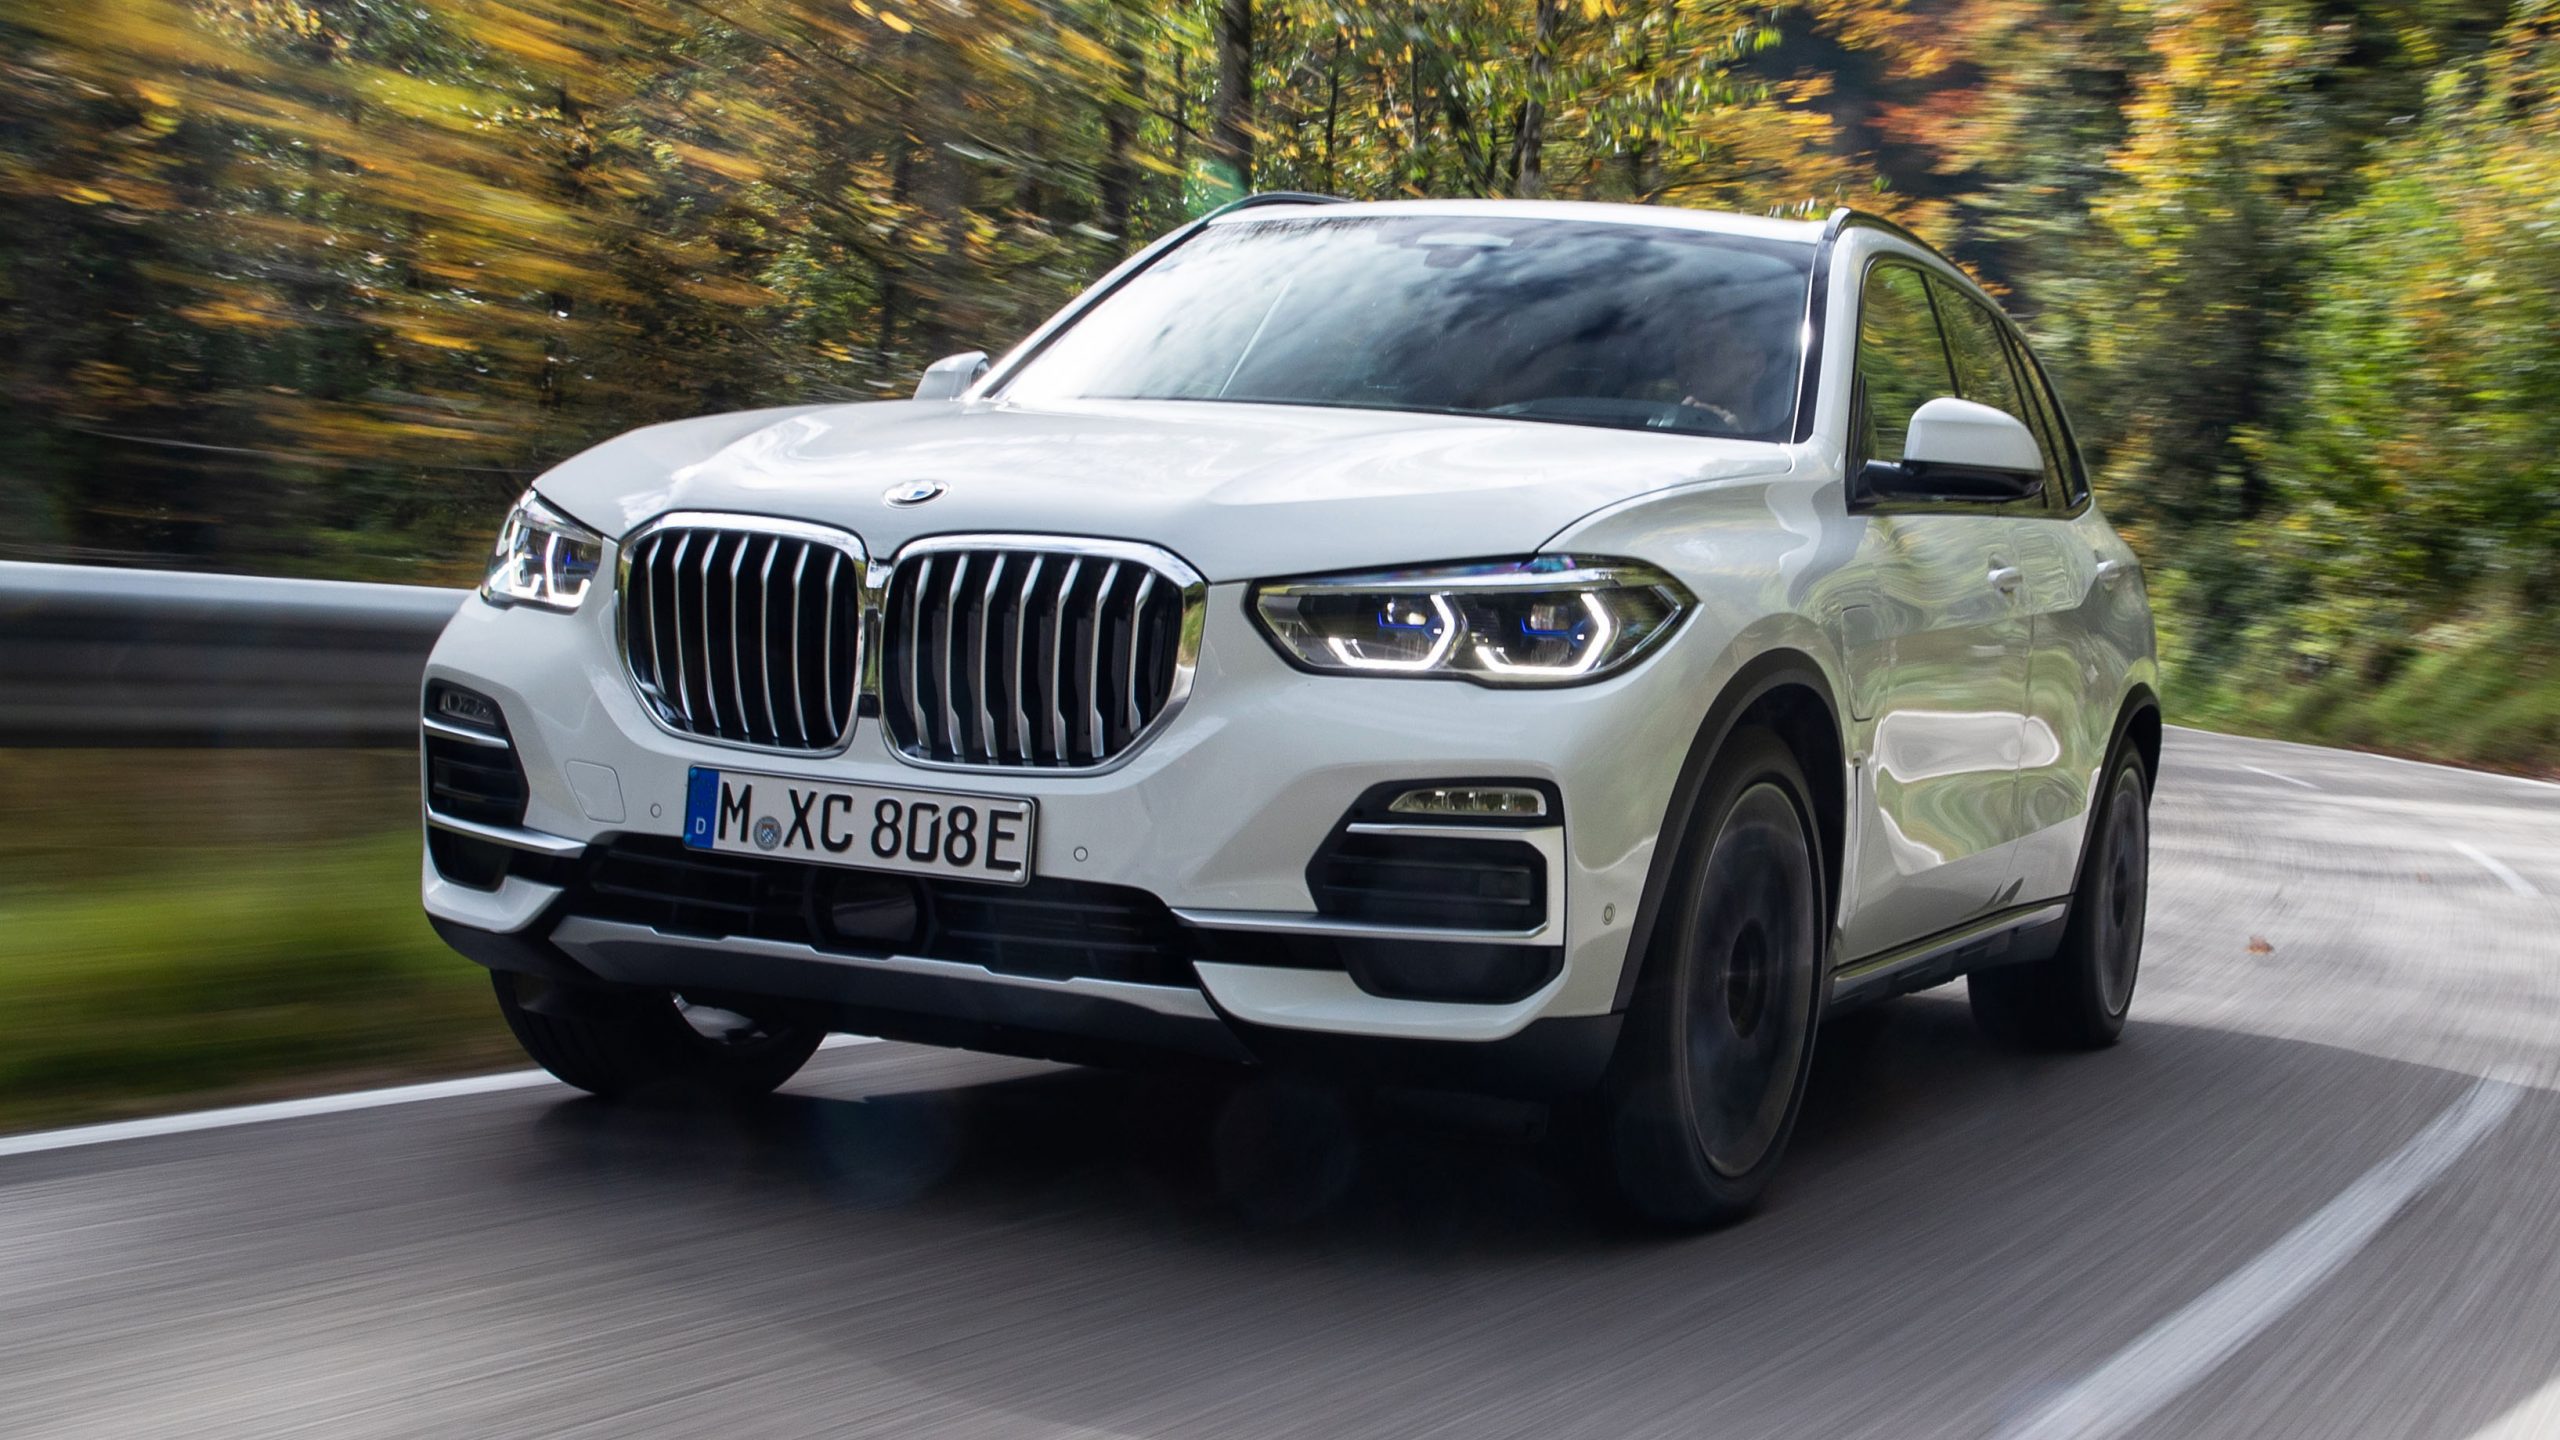 Bmw X5 Xdrive 45e Hybrid Suv Tested Top Gear throughout proportions 3269 X 1839